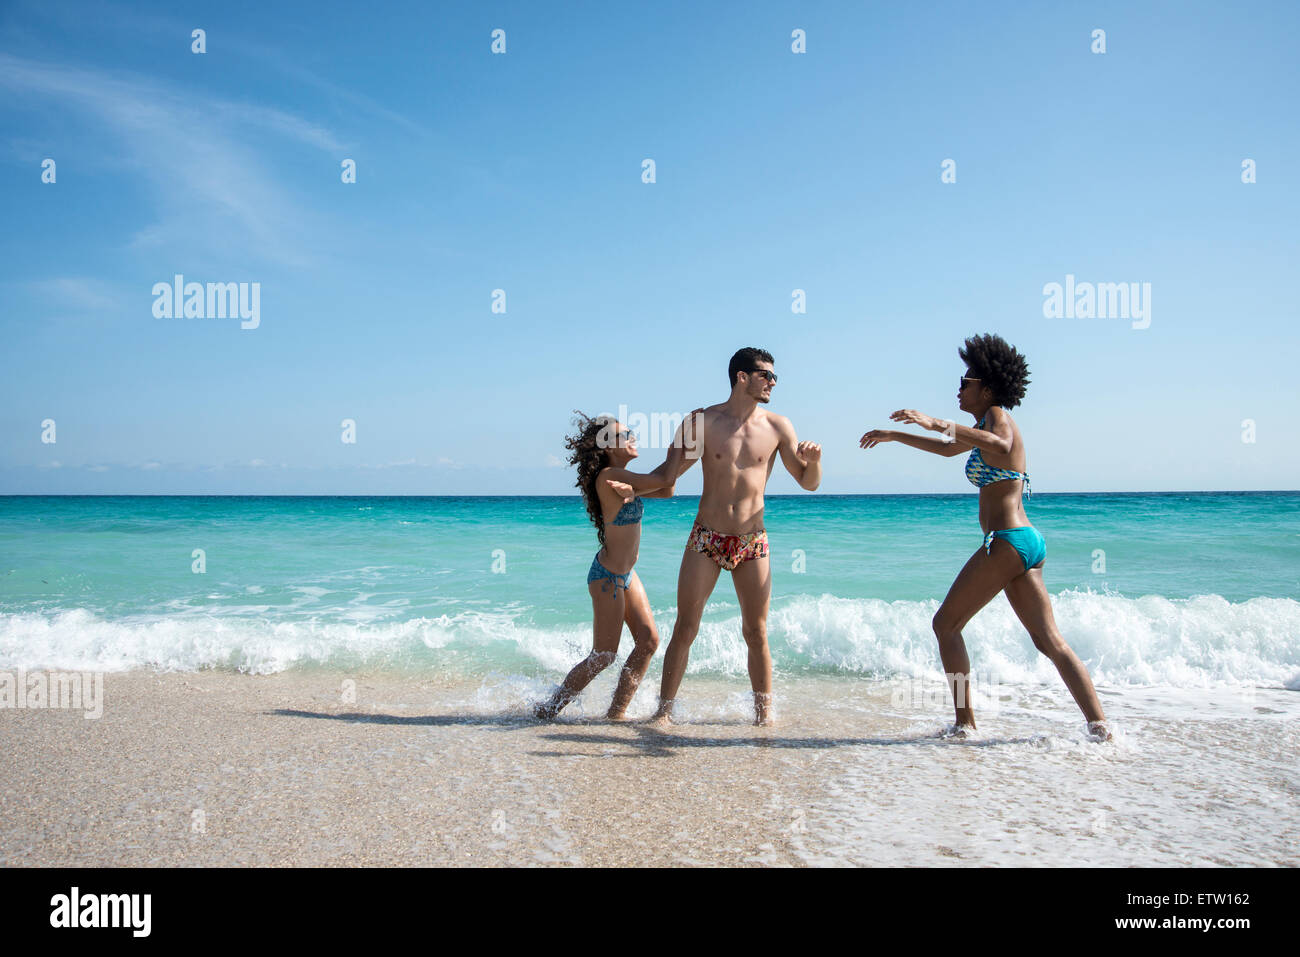 Three people playing on the beach Stock Photo